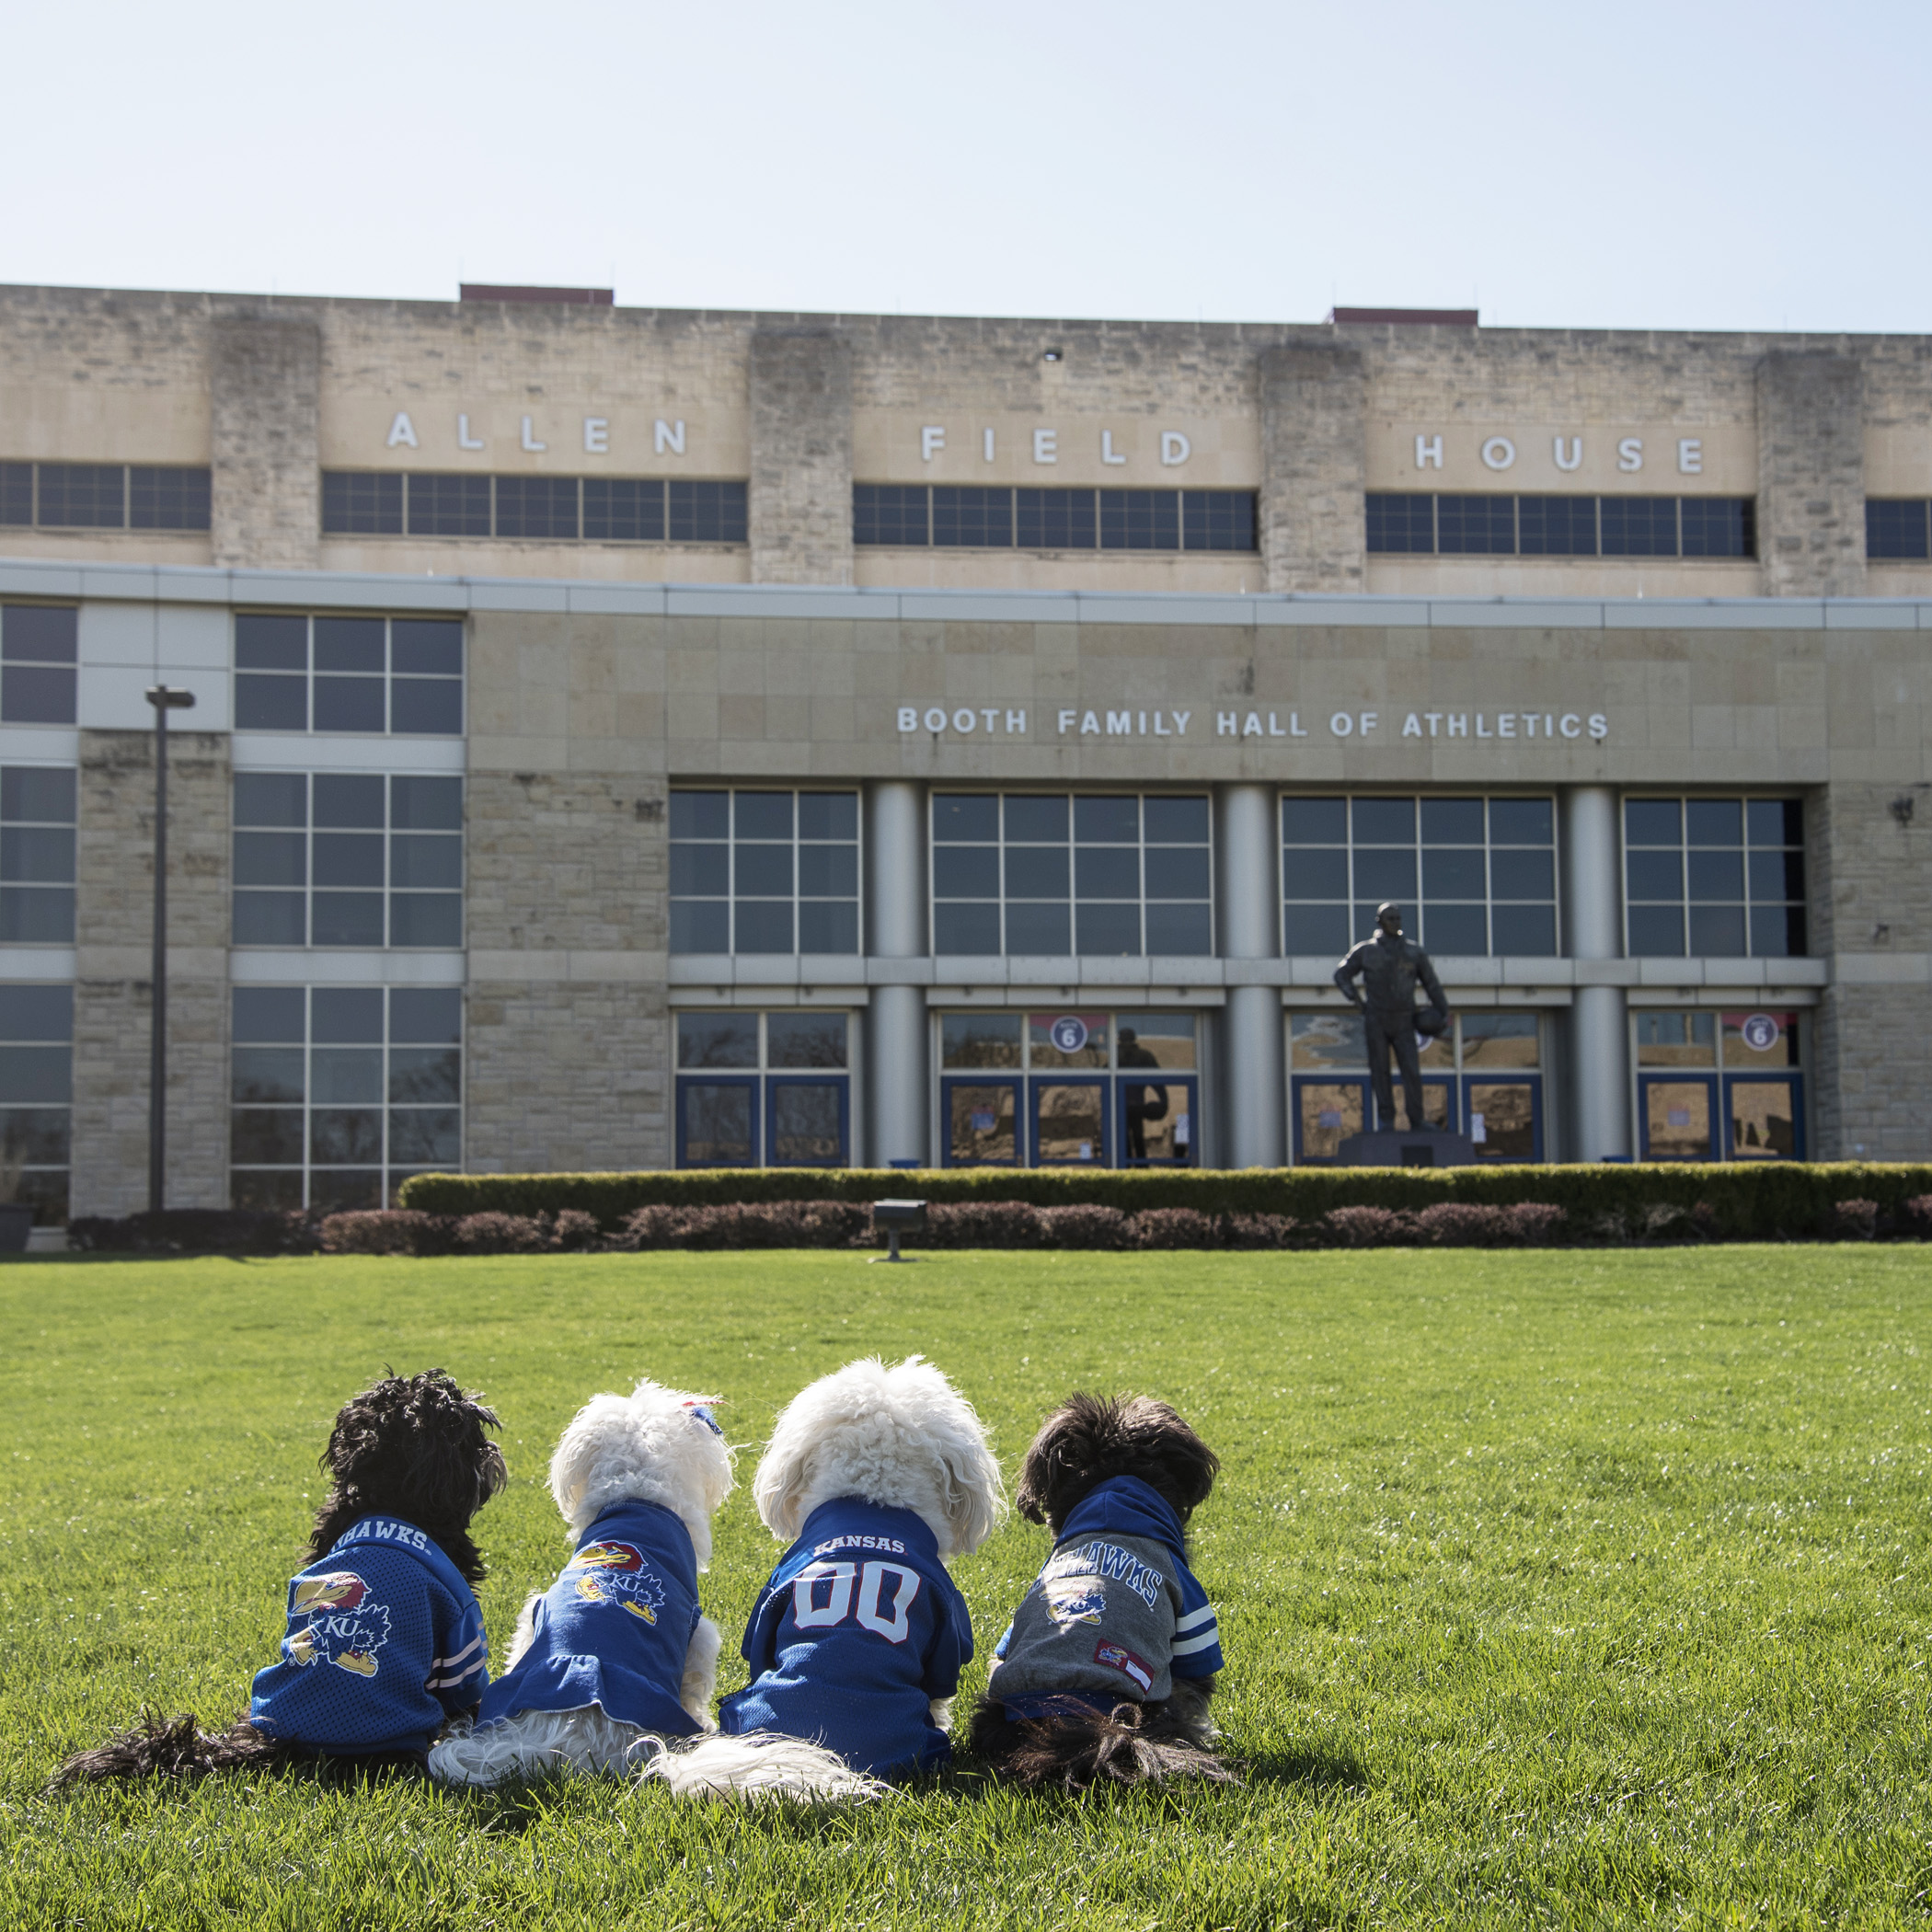  Visiting our parents alma mater, The  #UniversityofKansas , has been on our bucket list for many years. This Spring, we finally had a chance to take a tour of the campus! Of course, our tour had to start at  #AllenFieldHouse …it is the home of  #KUB